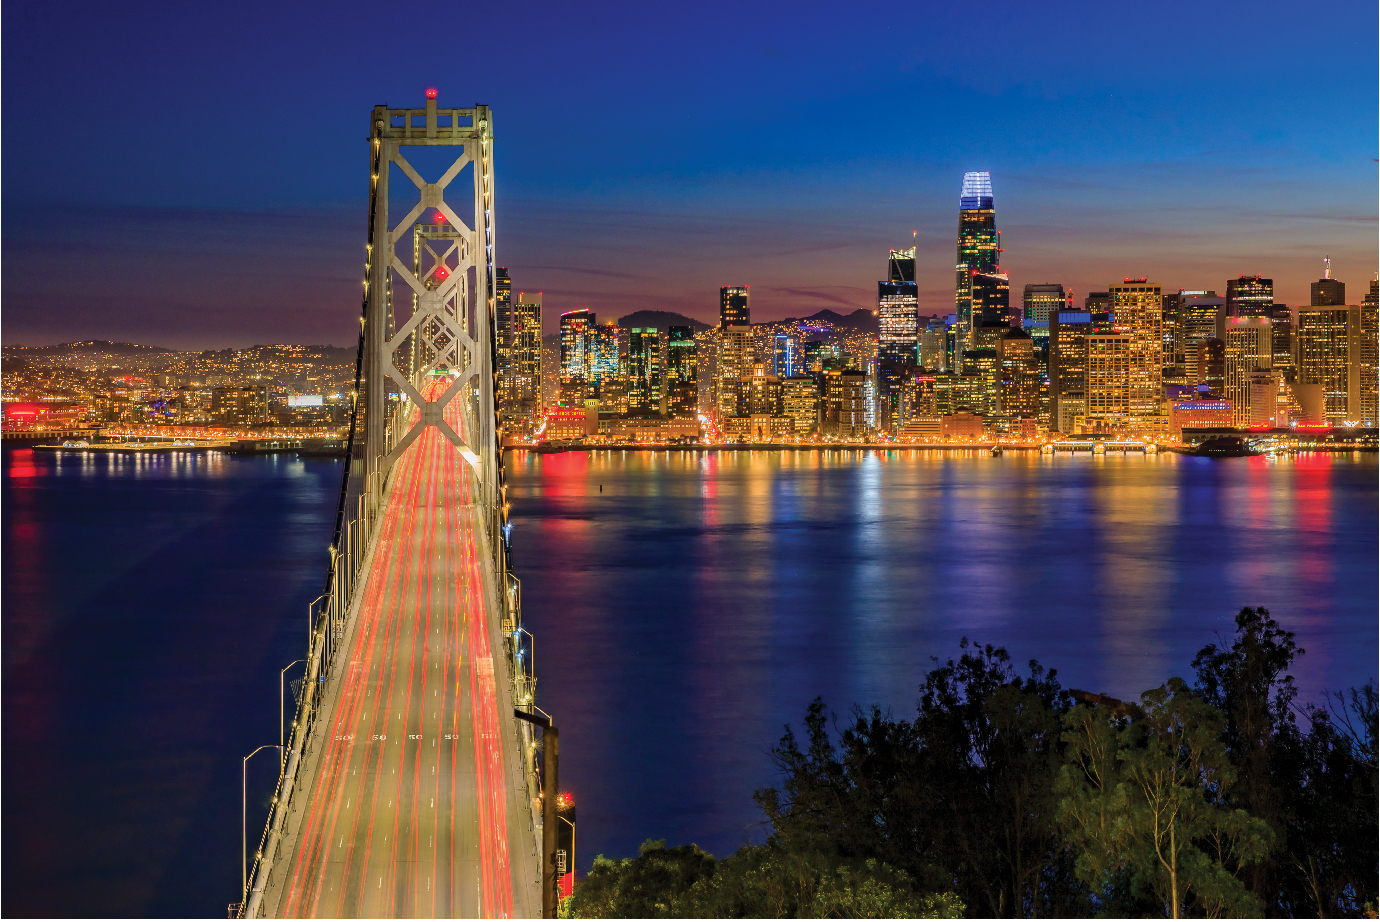 A night view of San Francisco from the view of the Bay Bridge looking west.